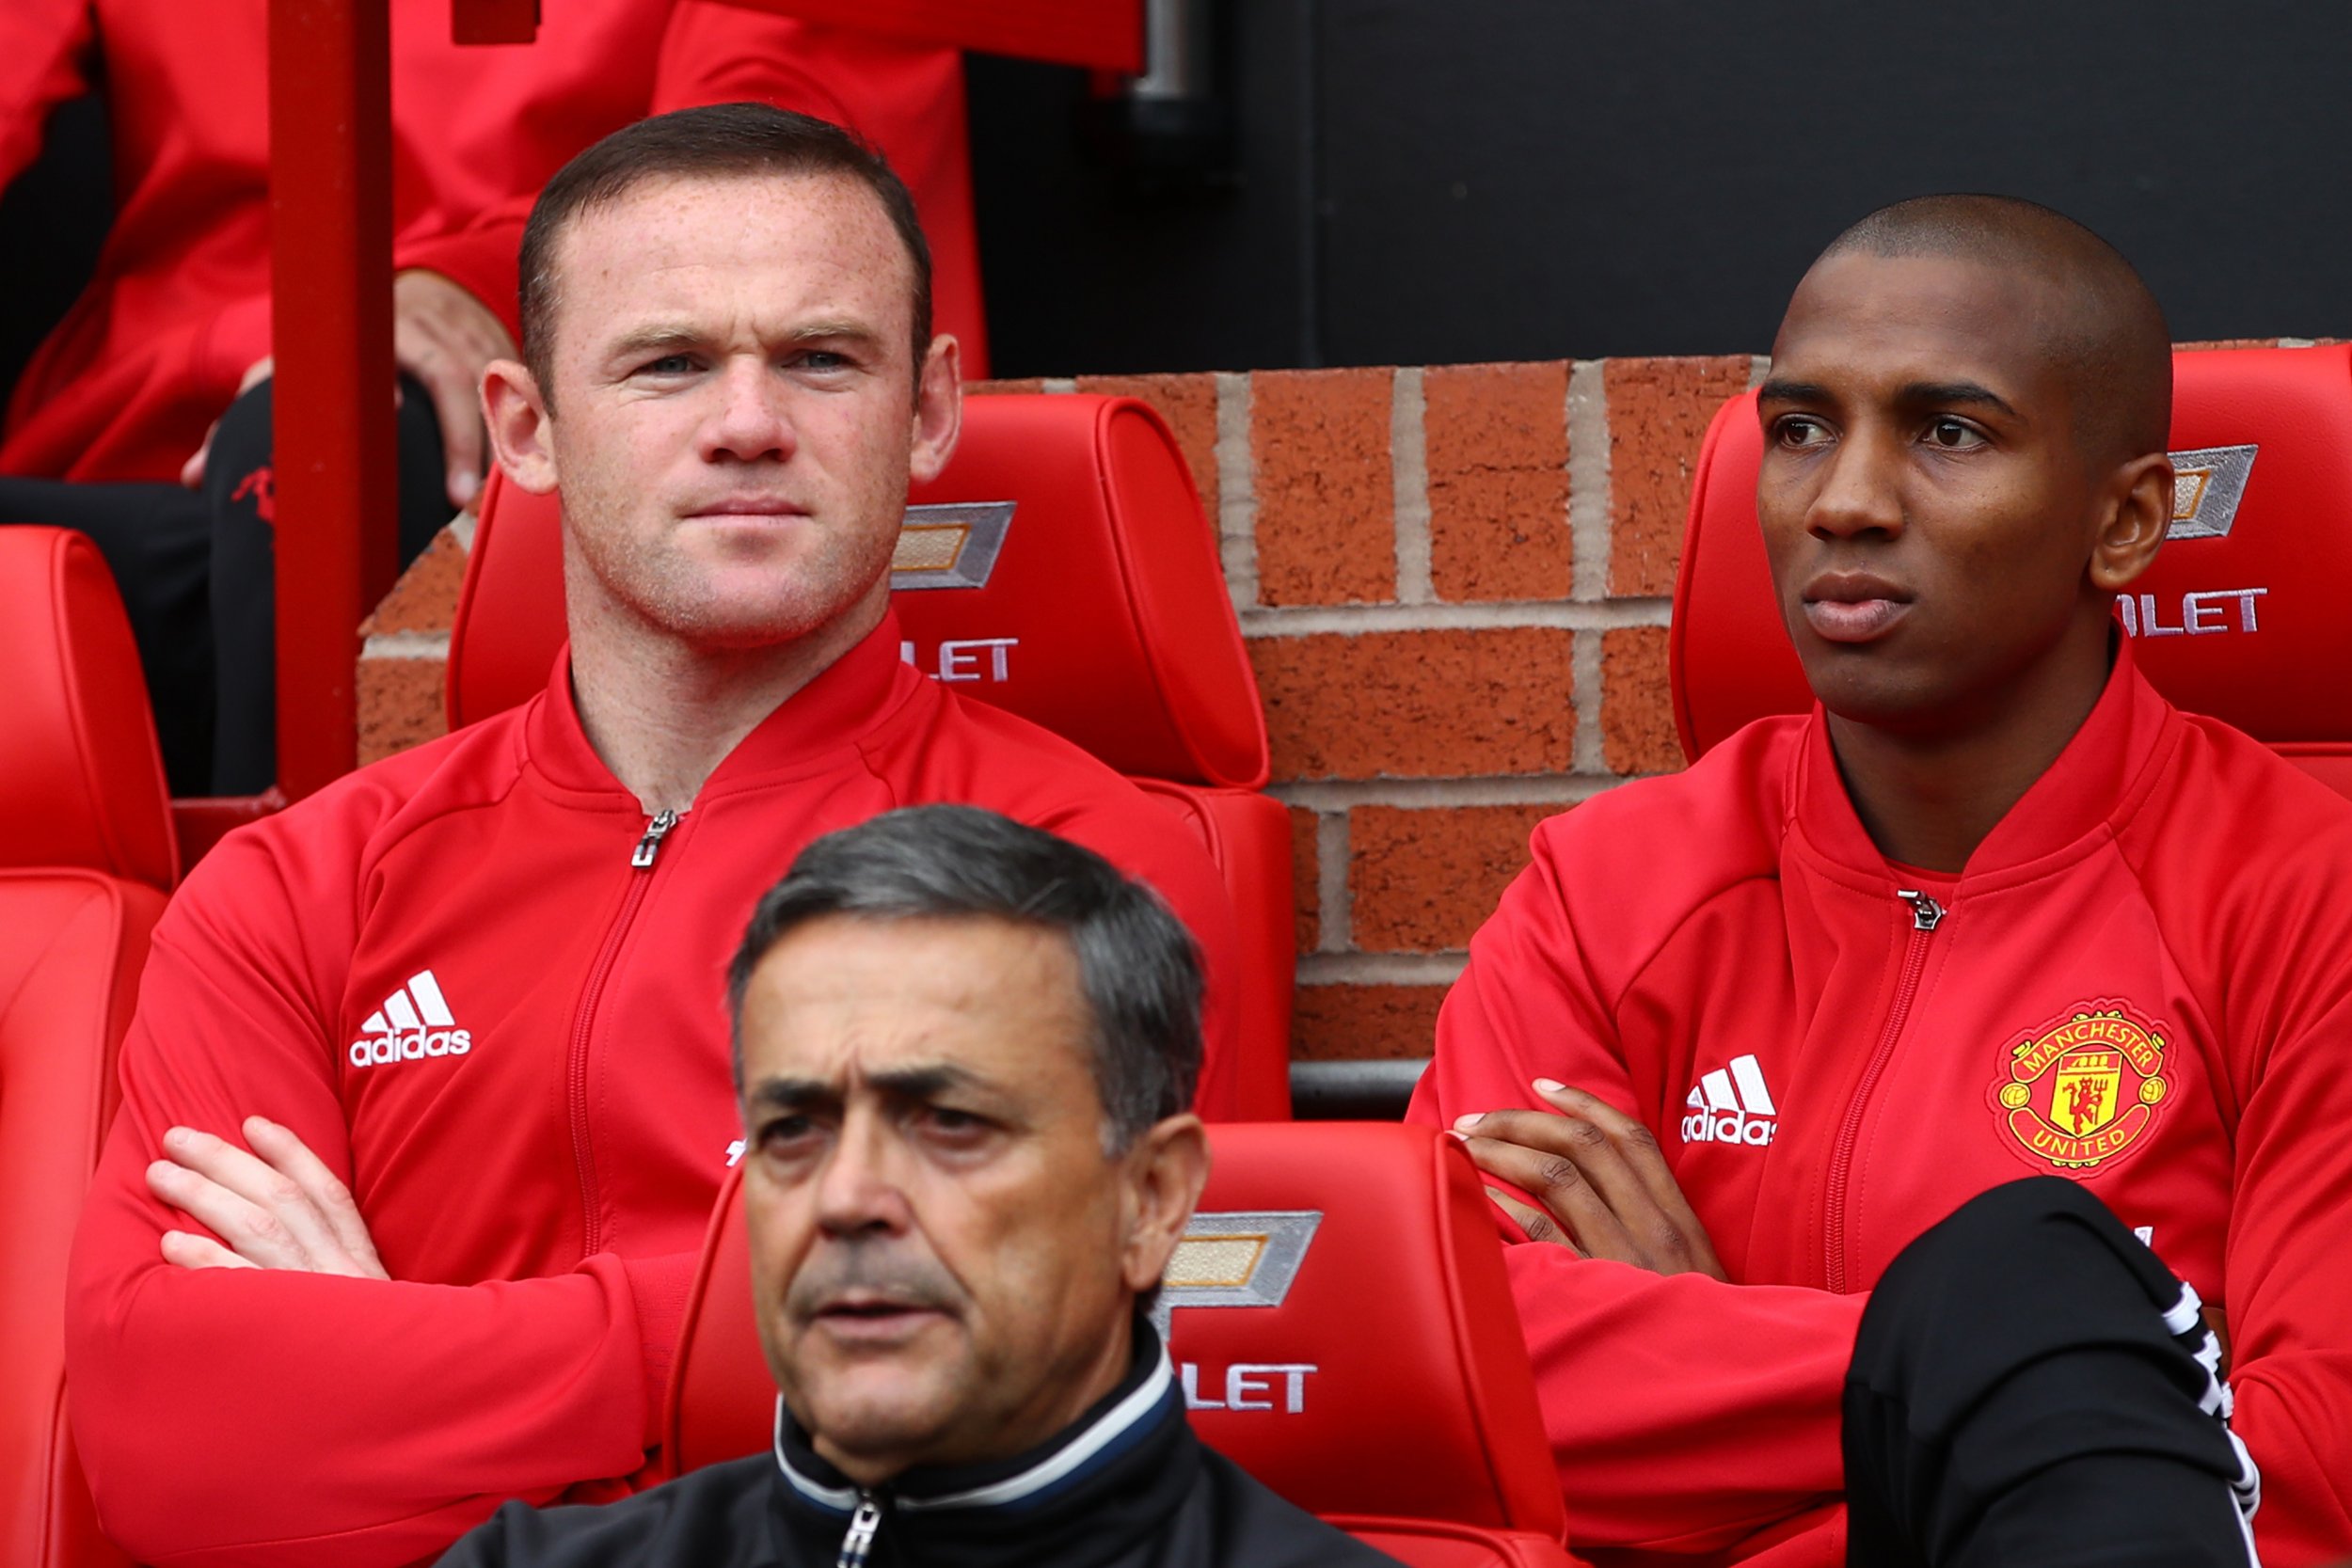 Wayne Rooney and Ashley Young